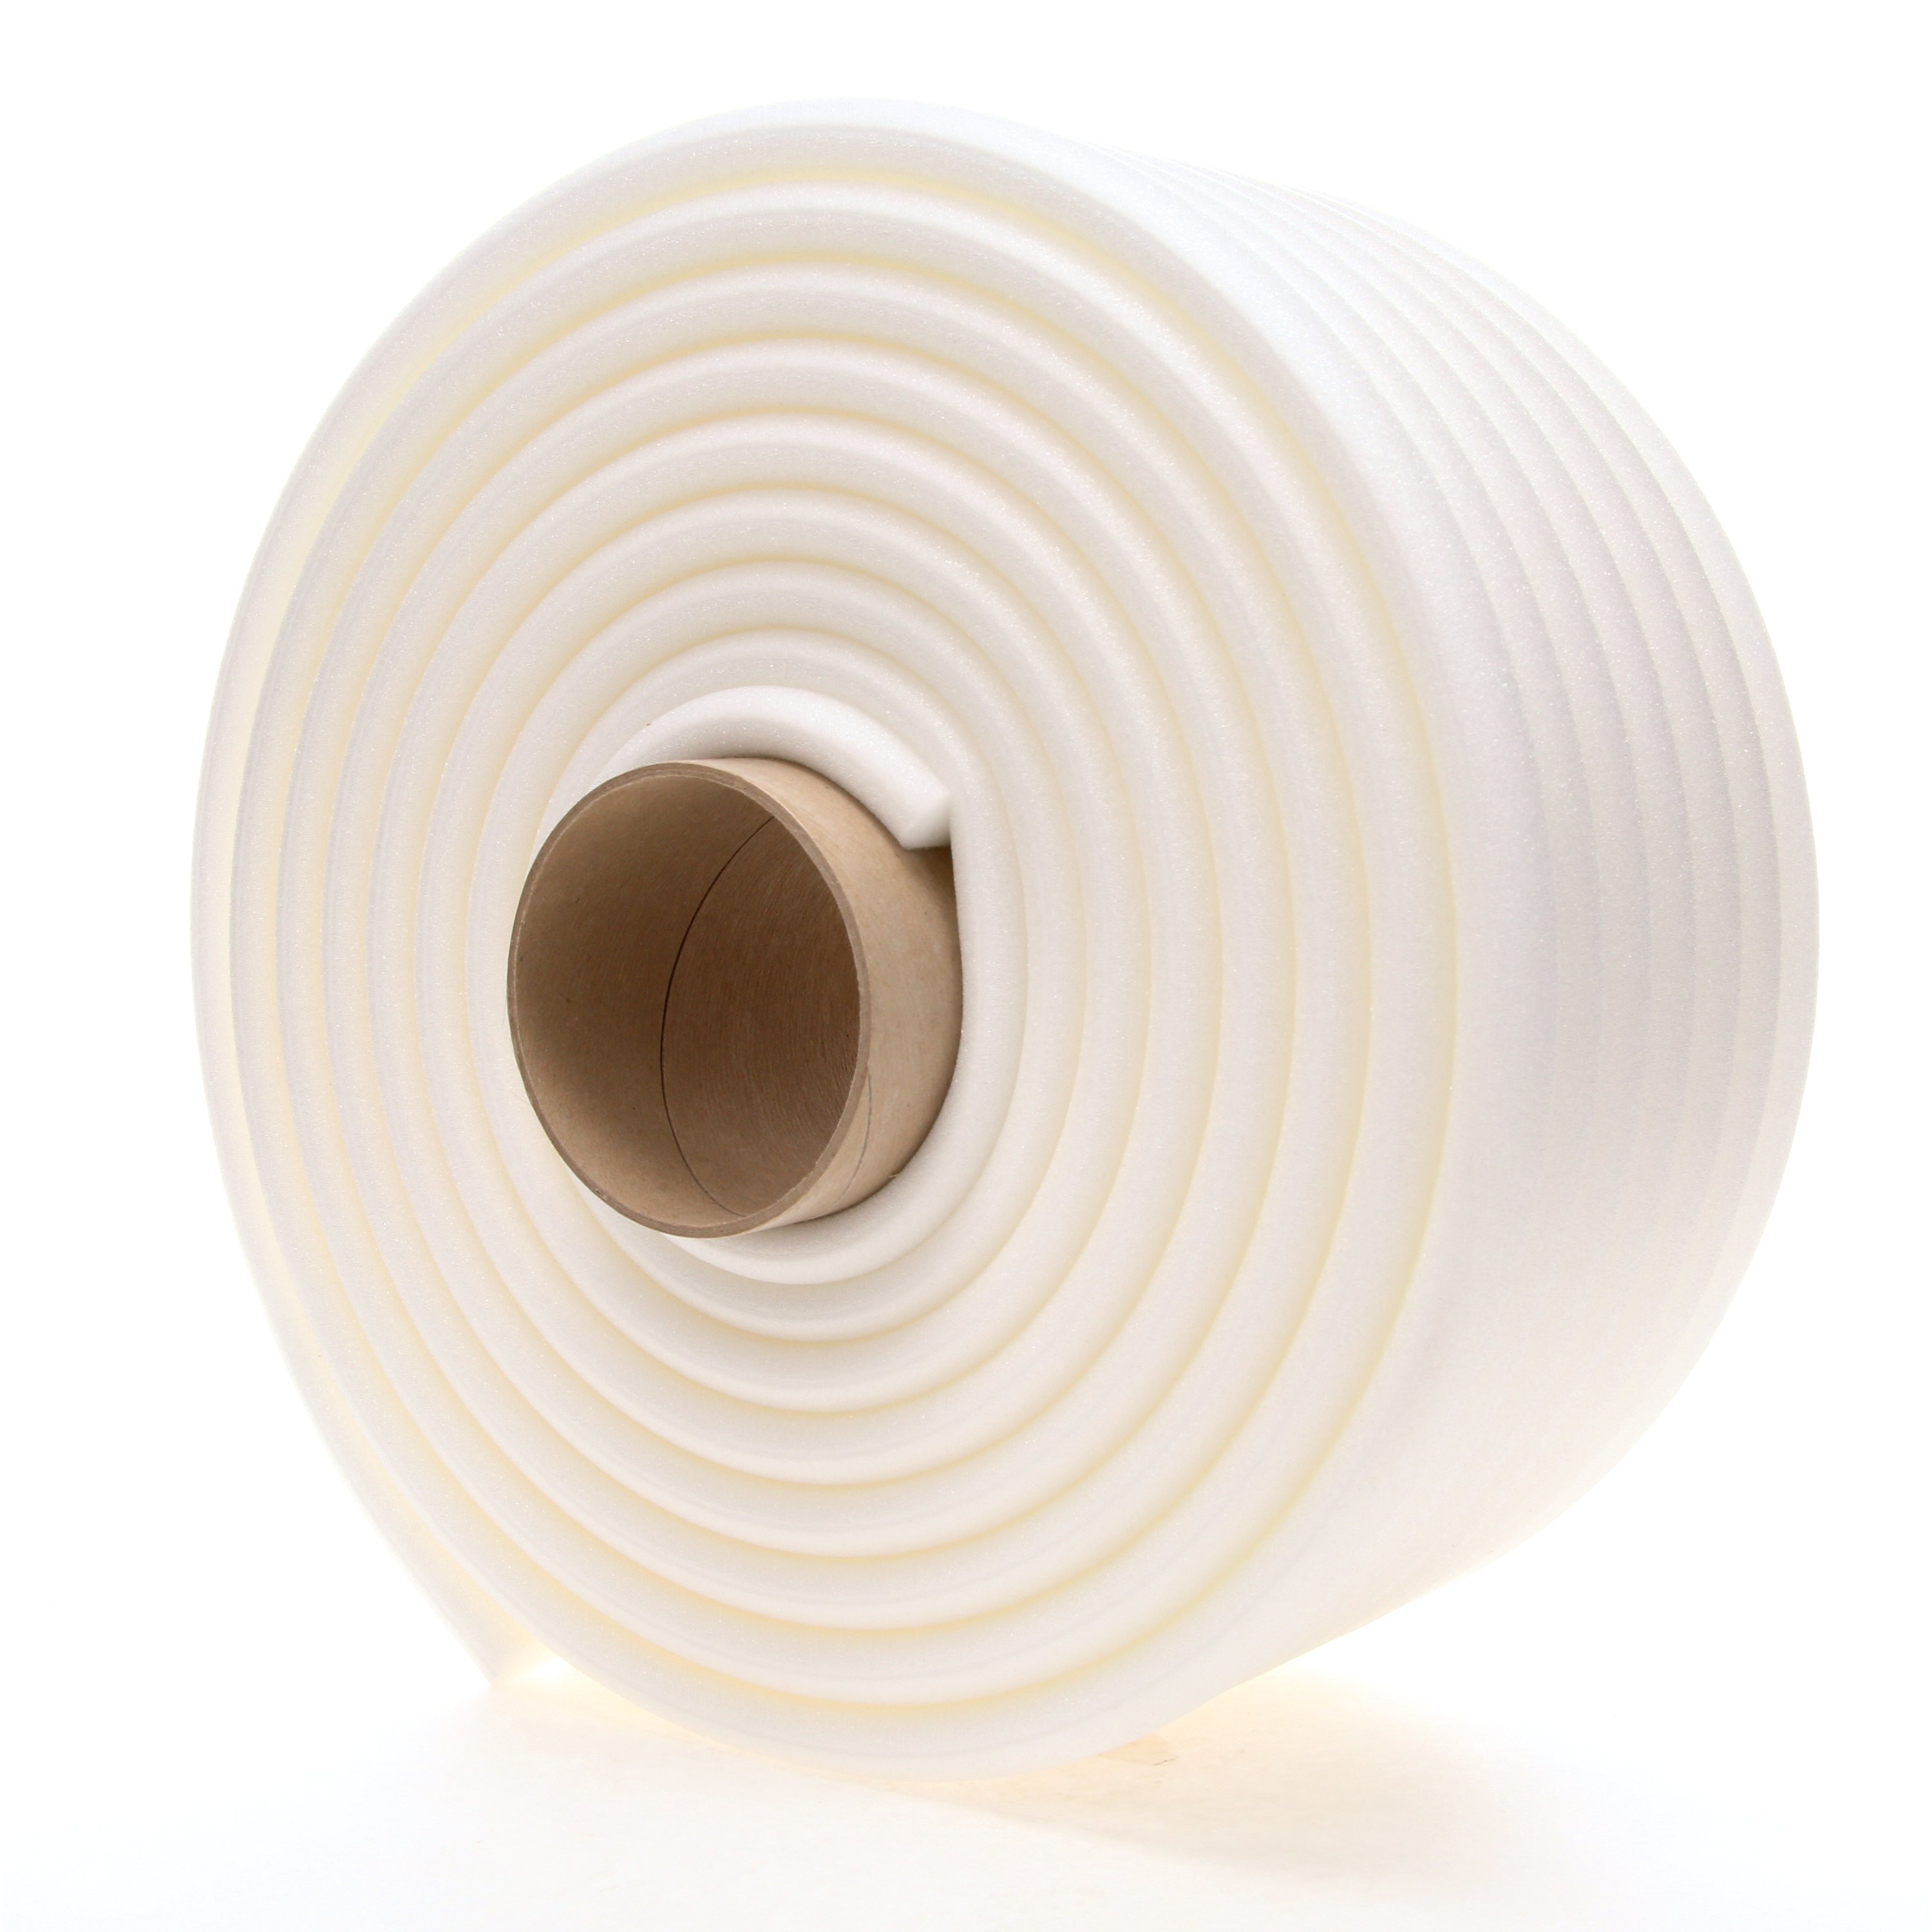 3M™ Soft Edge Foam Tape eliminates rework due to unwanted overspray and hard paint lines. Ordinary flat masking tape can leave hard paint lines when used inside jambs, or must be rolled in order to create a soft edge